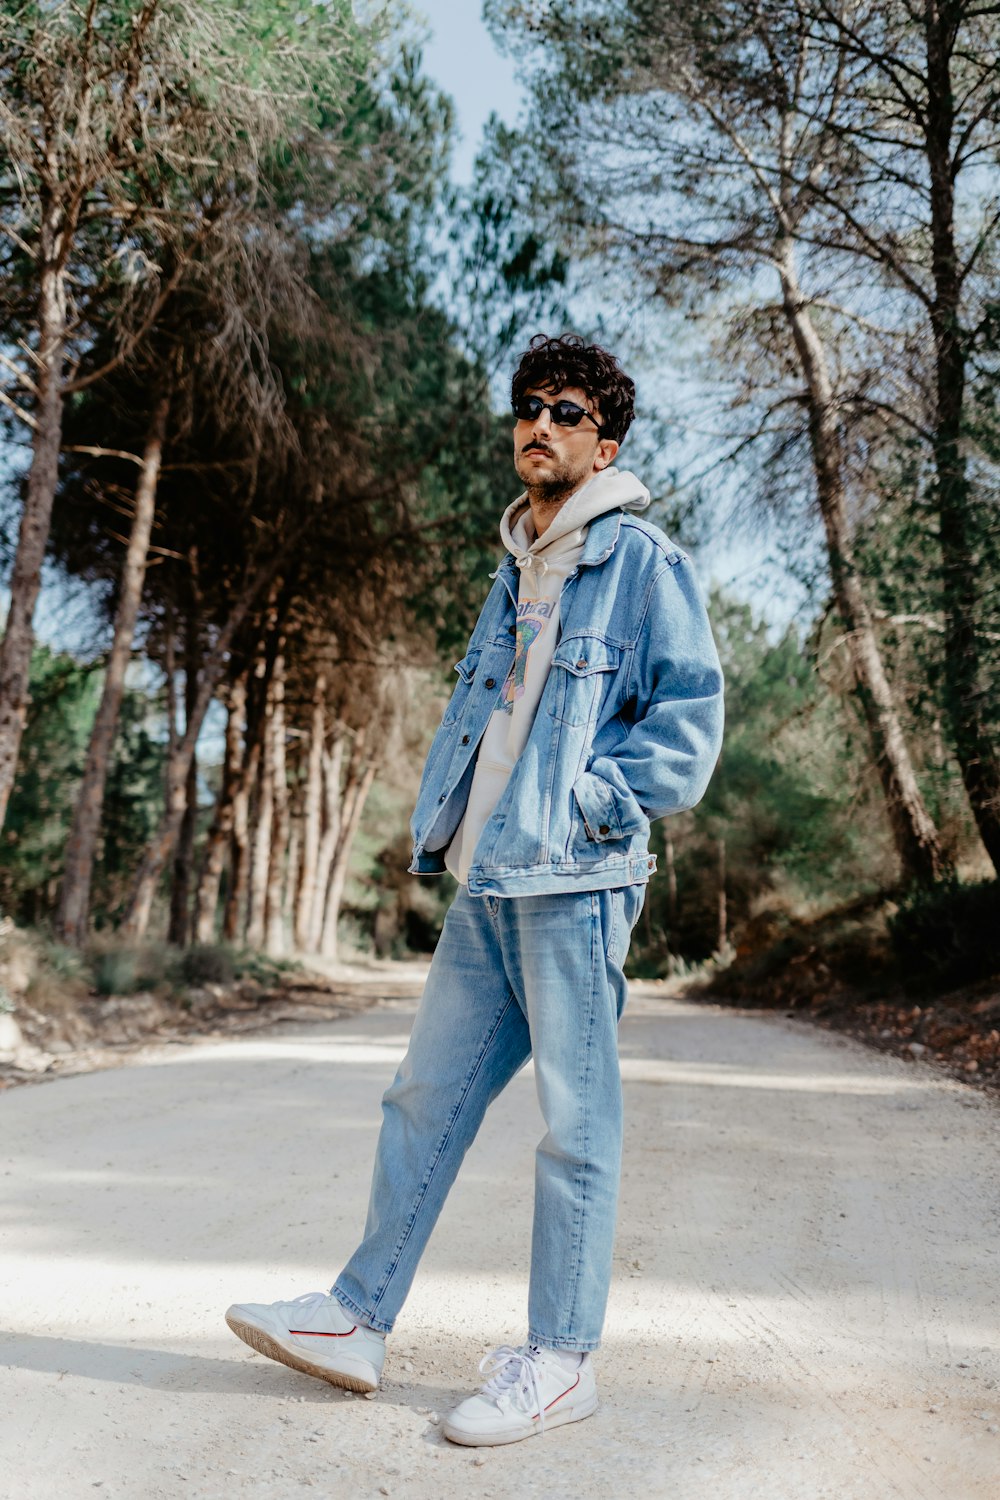 a man standing on a road wearing a denim jacket and jeans